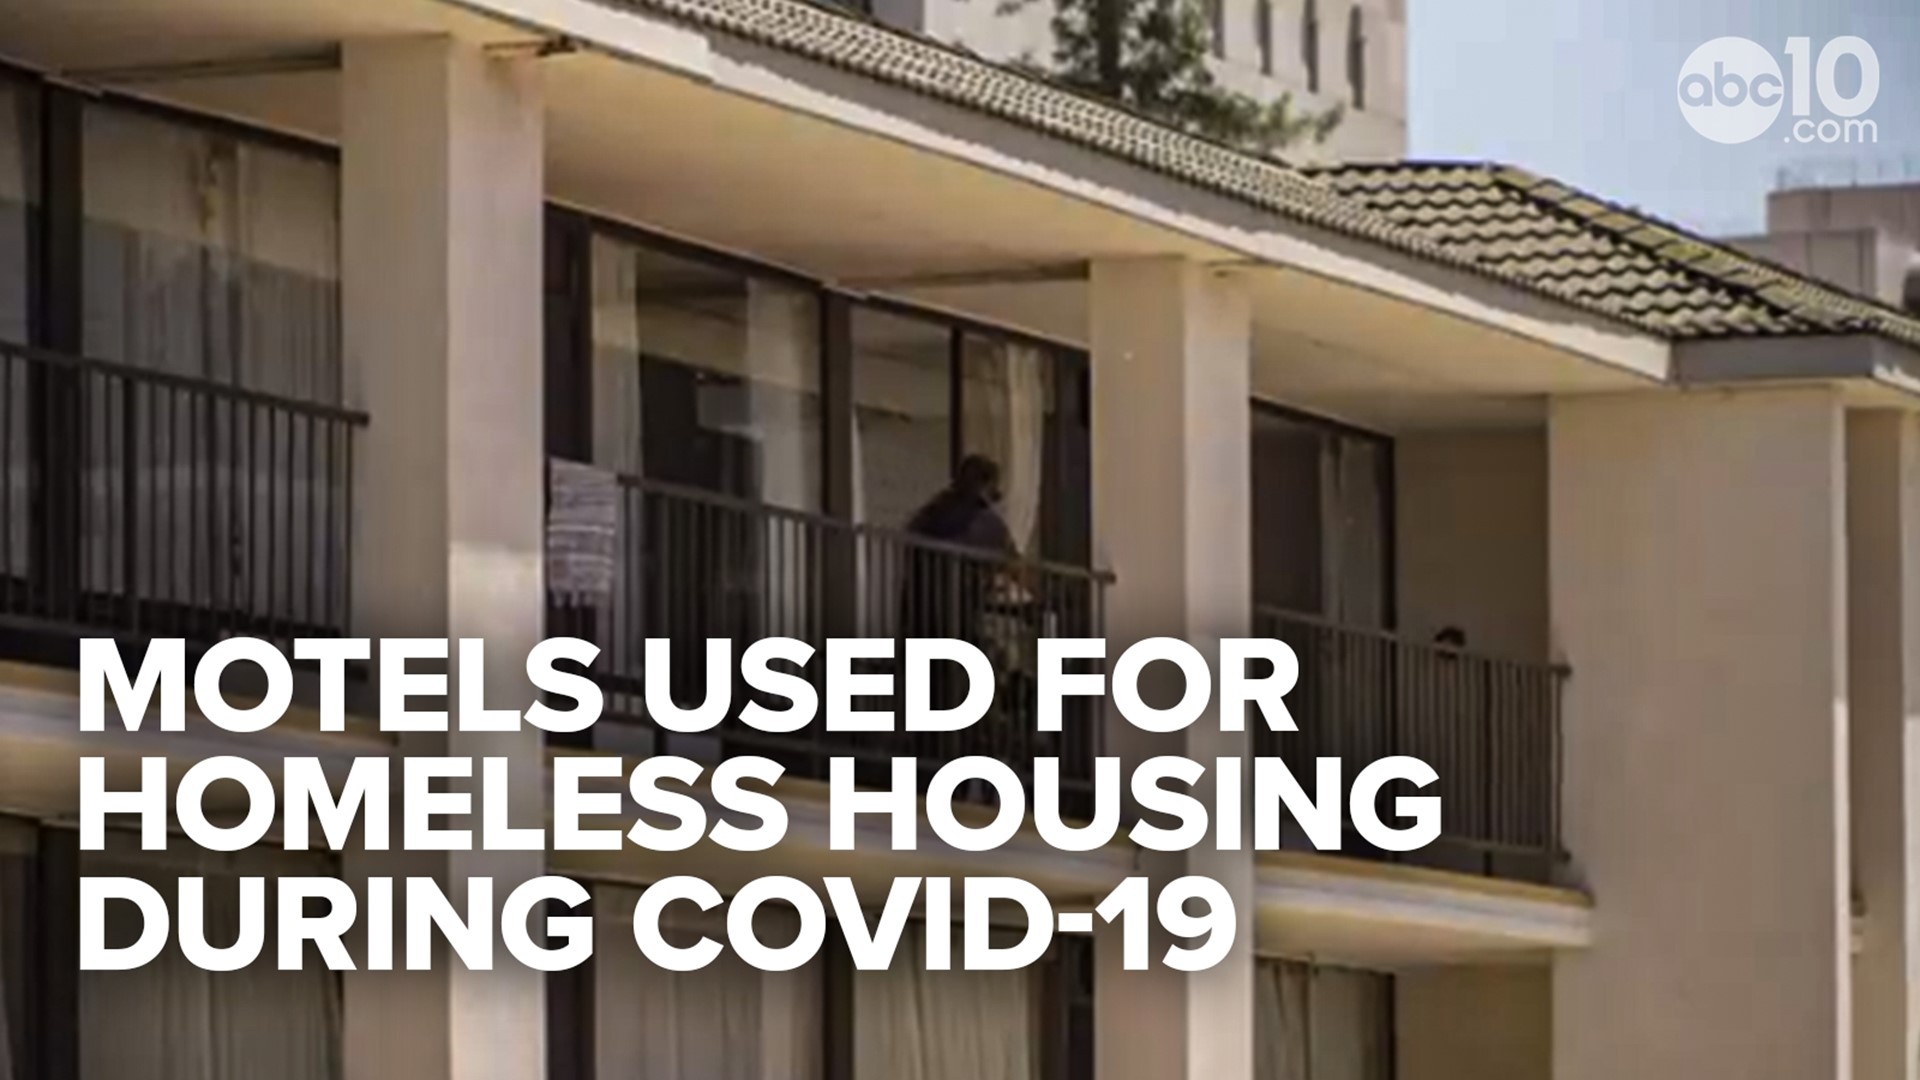 California officials established hotel and motel rooms for use by homeless residents during the COVID-19 spike, but now state funds have run out.